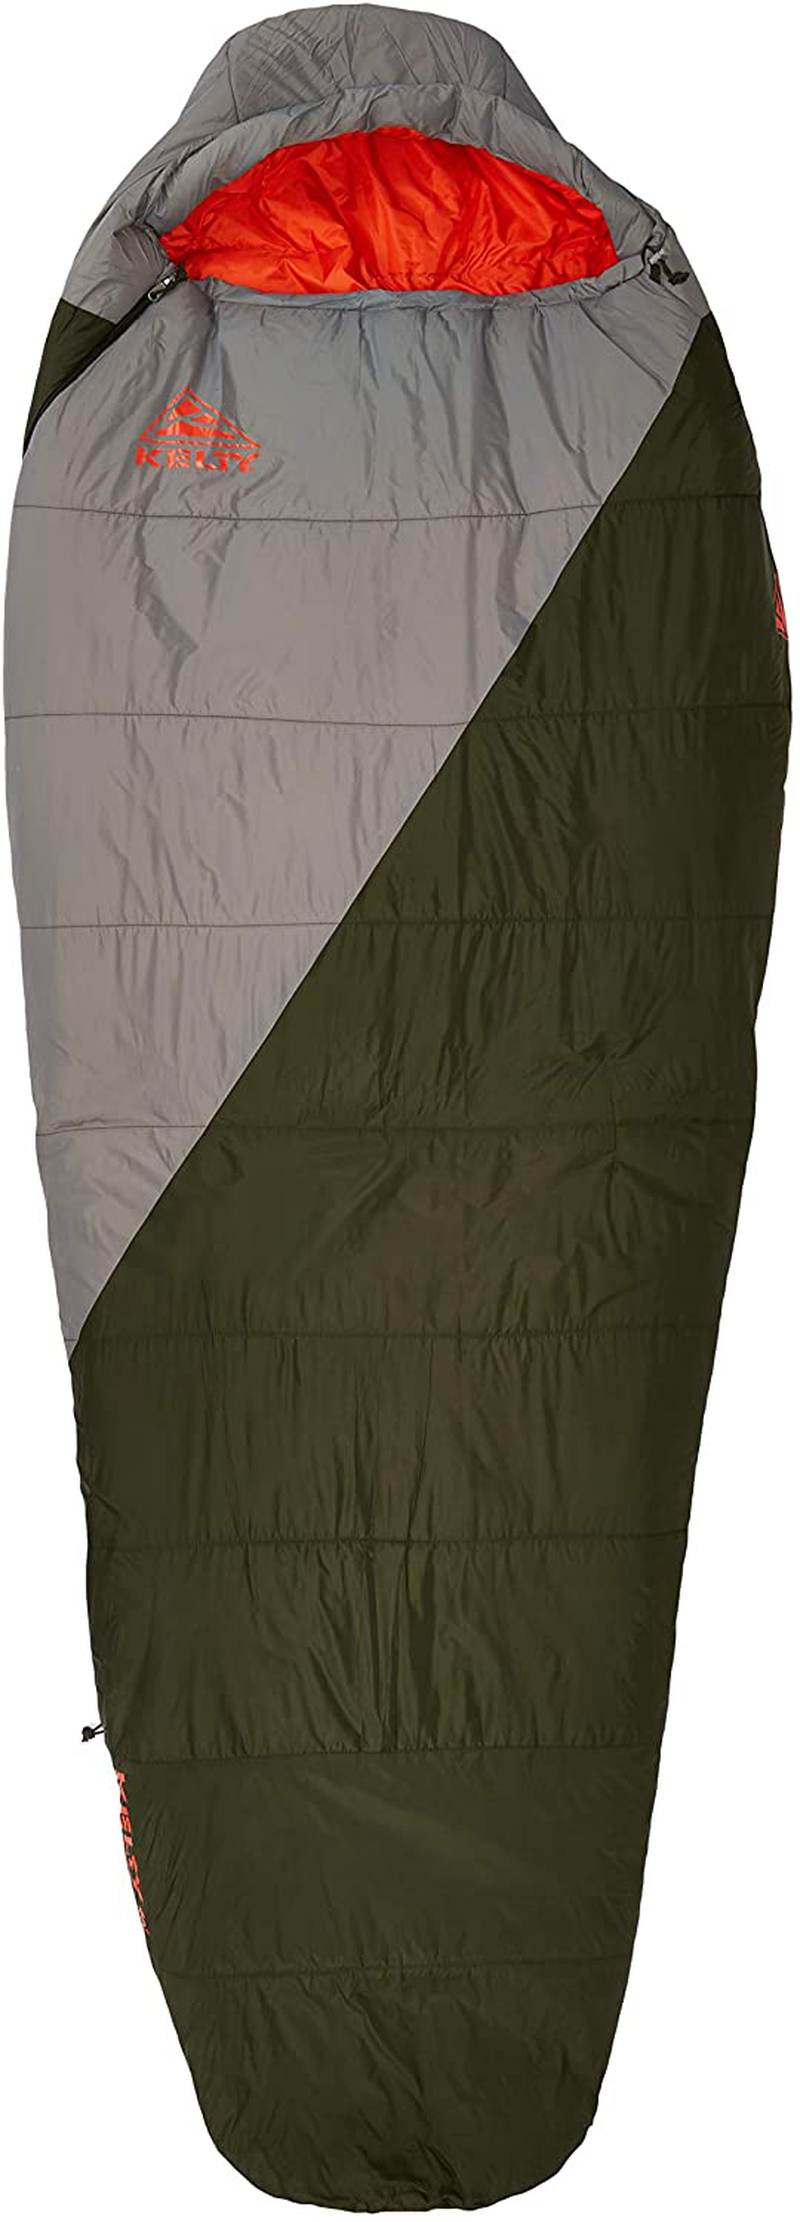 Kelty Cosmic Synthetic Fill 40 Degree Backpacking Sleeping Bag, Long – Compression Straps, Stuff Sack Included Sporting Goods > Outdoor Recreation > Camping & Hiking > Sleeping BagsSporting Goods > Outdoor Recreation > Camping & Hiking > Sleeping Bags Kelty   